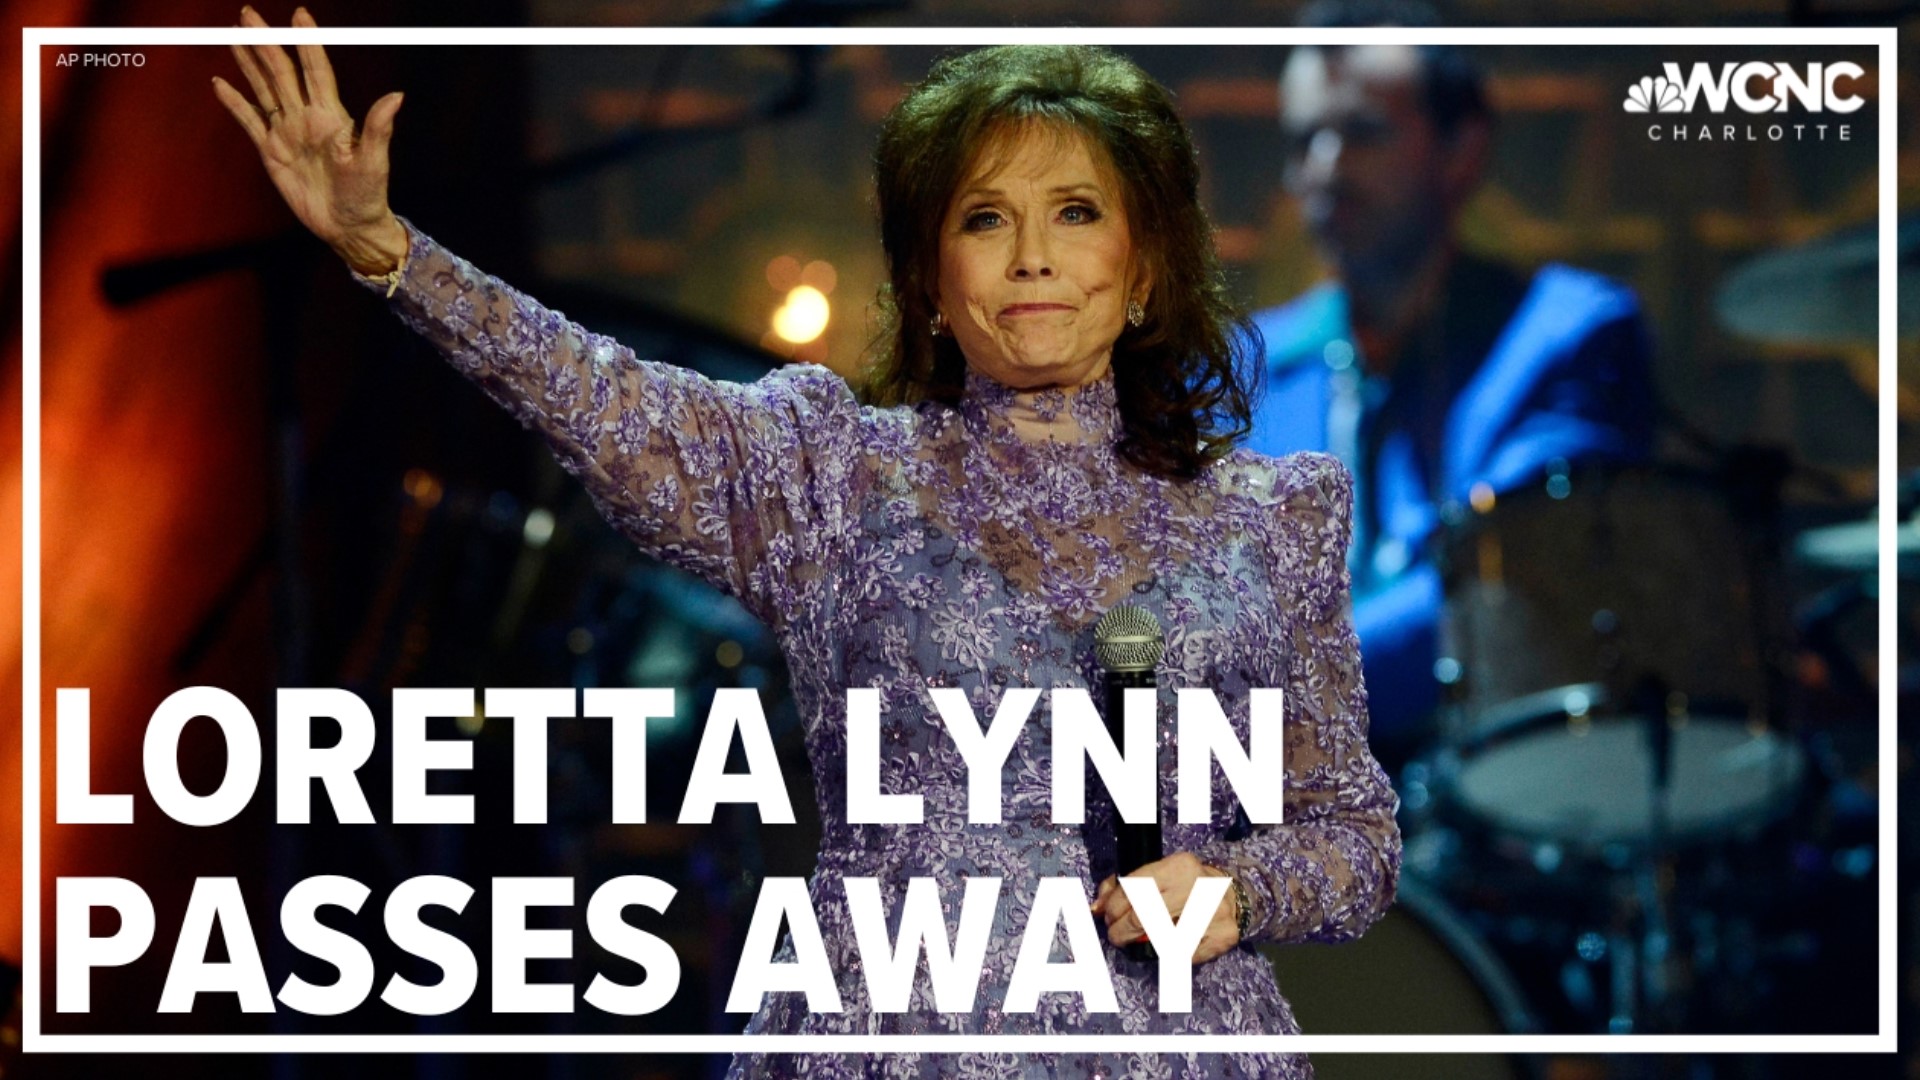 Counrty music icon Loretta Lynn passed away at the age of 90.